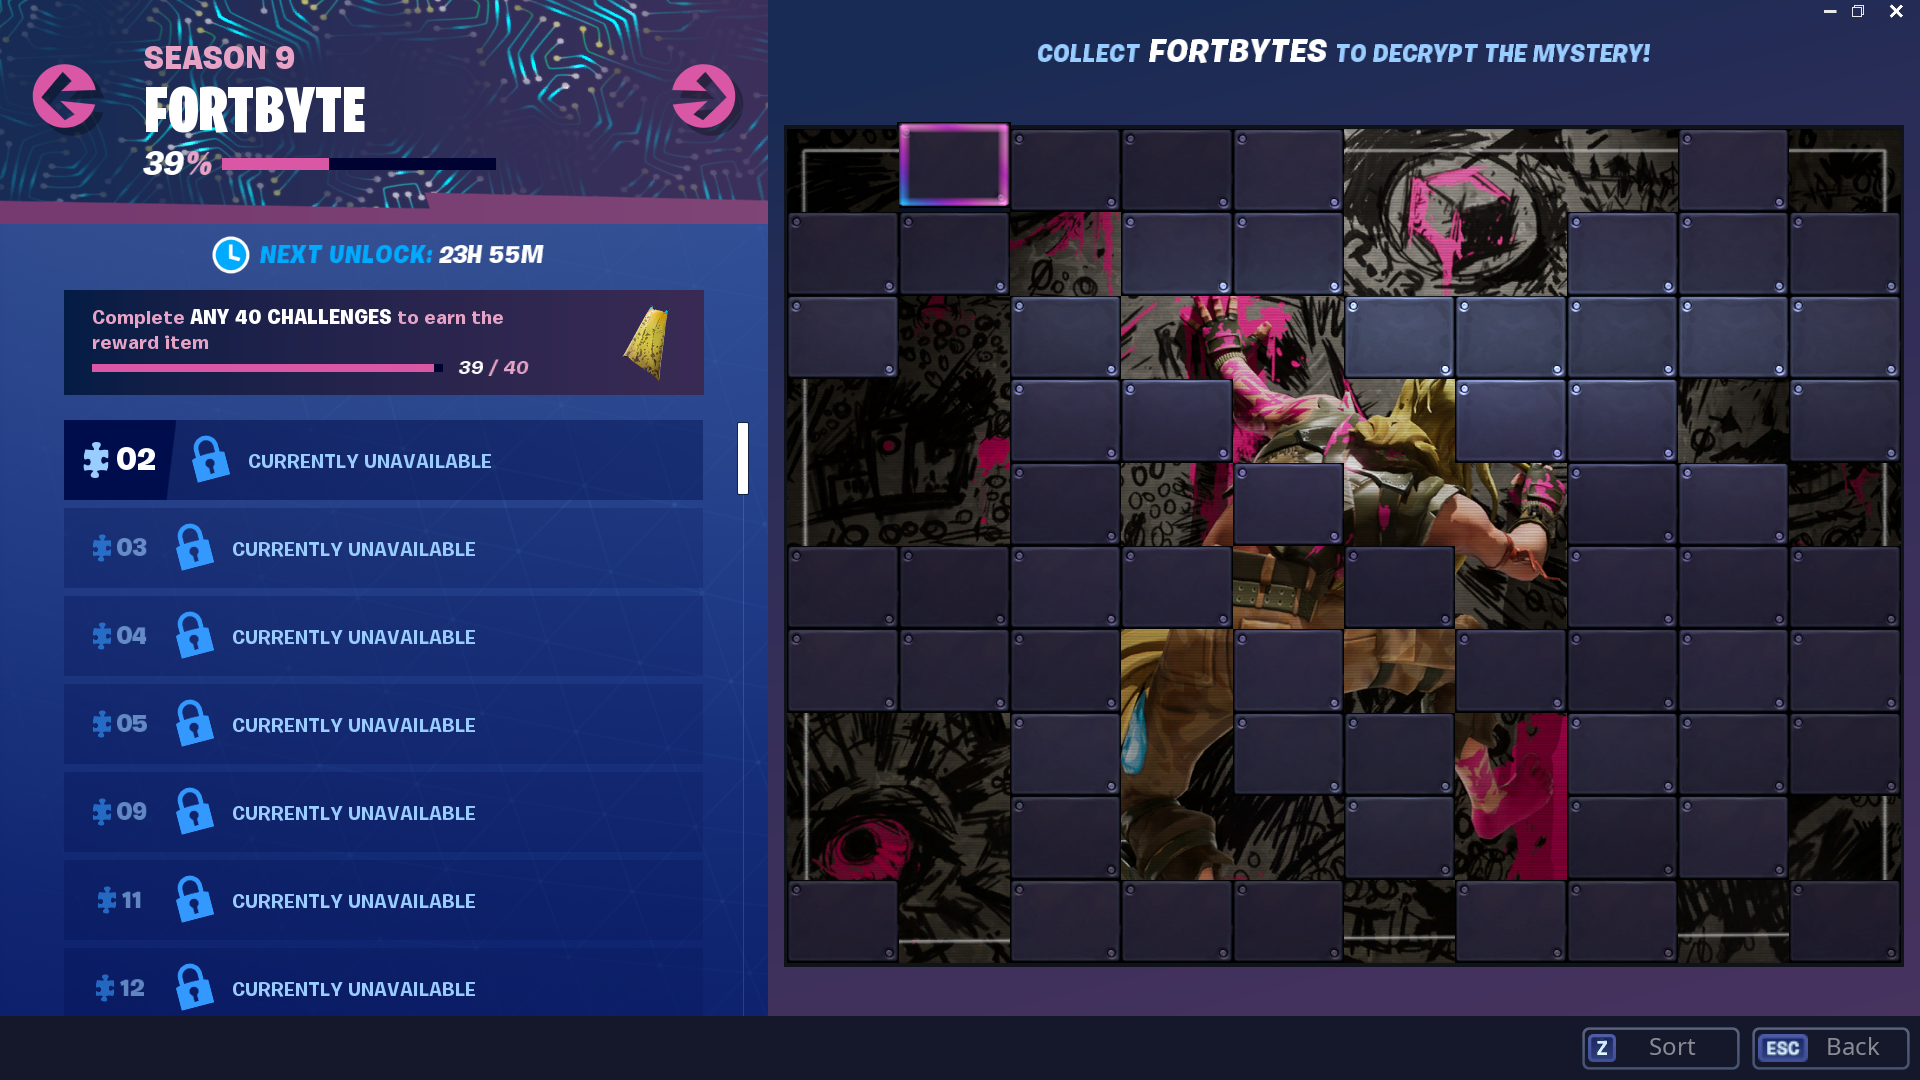 fortnite season 9 the fortbyte guide - collect 90 fortbytes fortnite locations